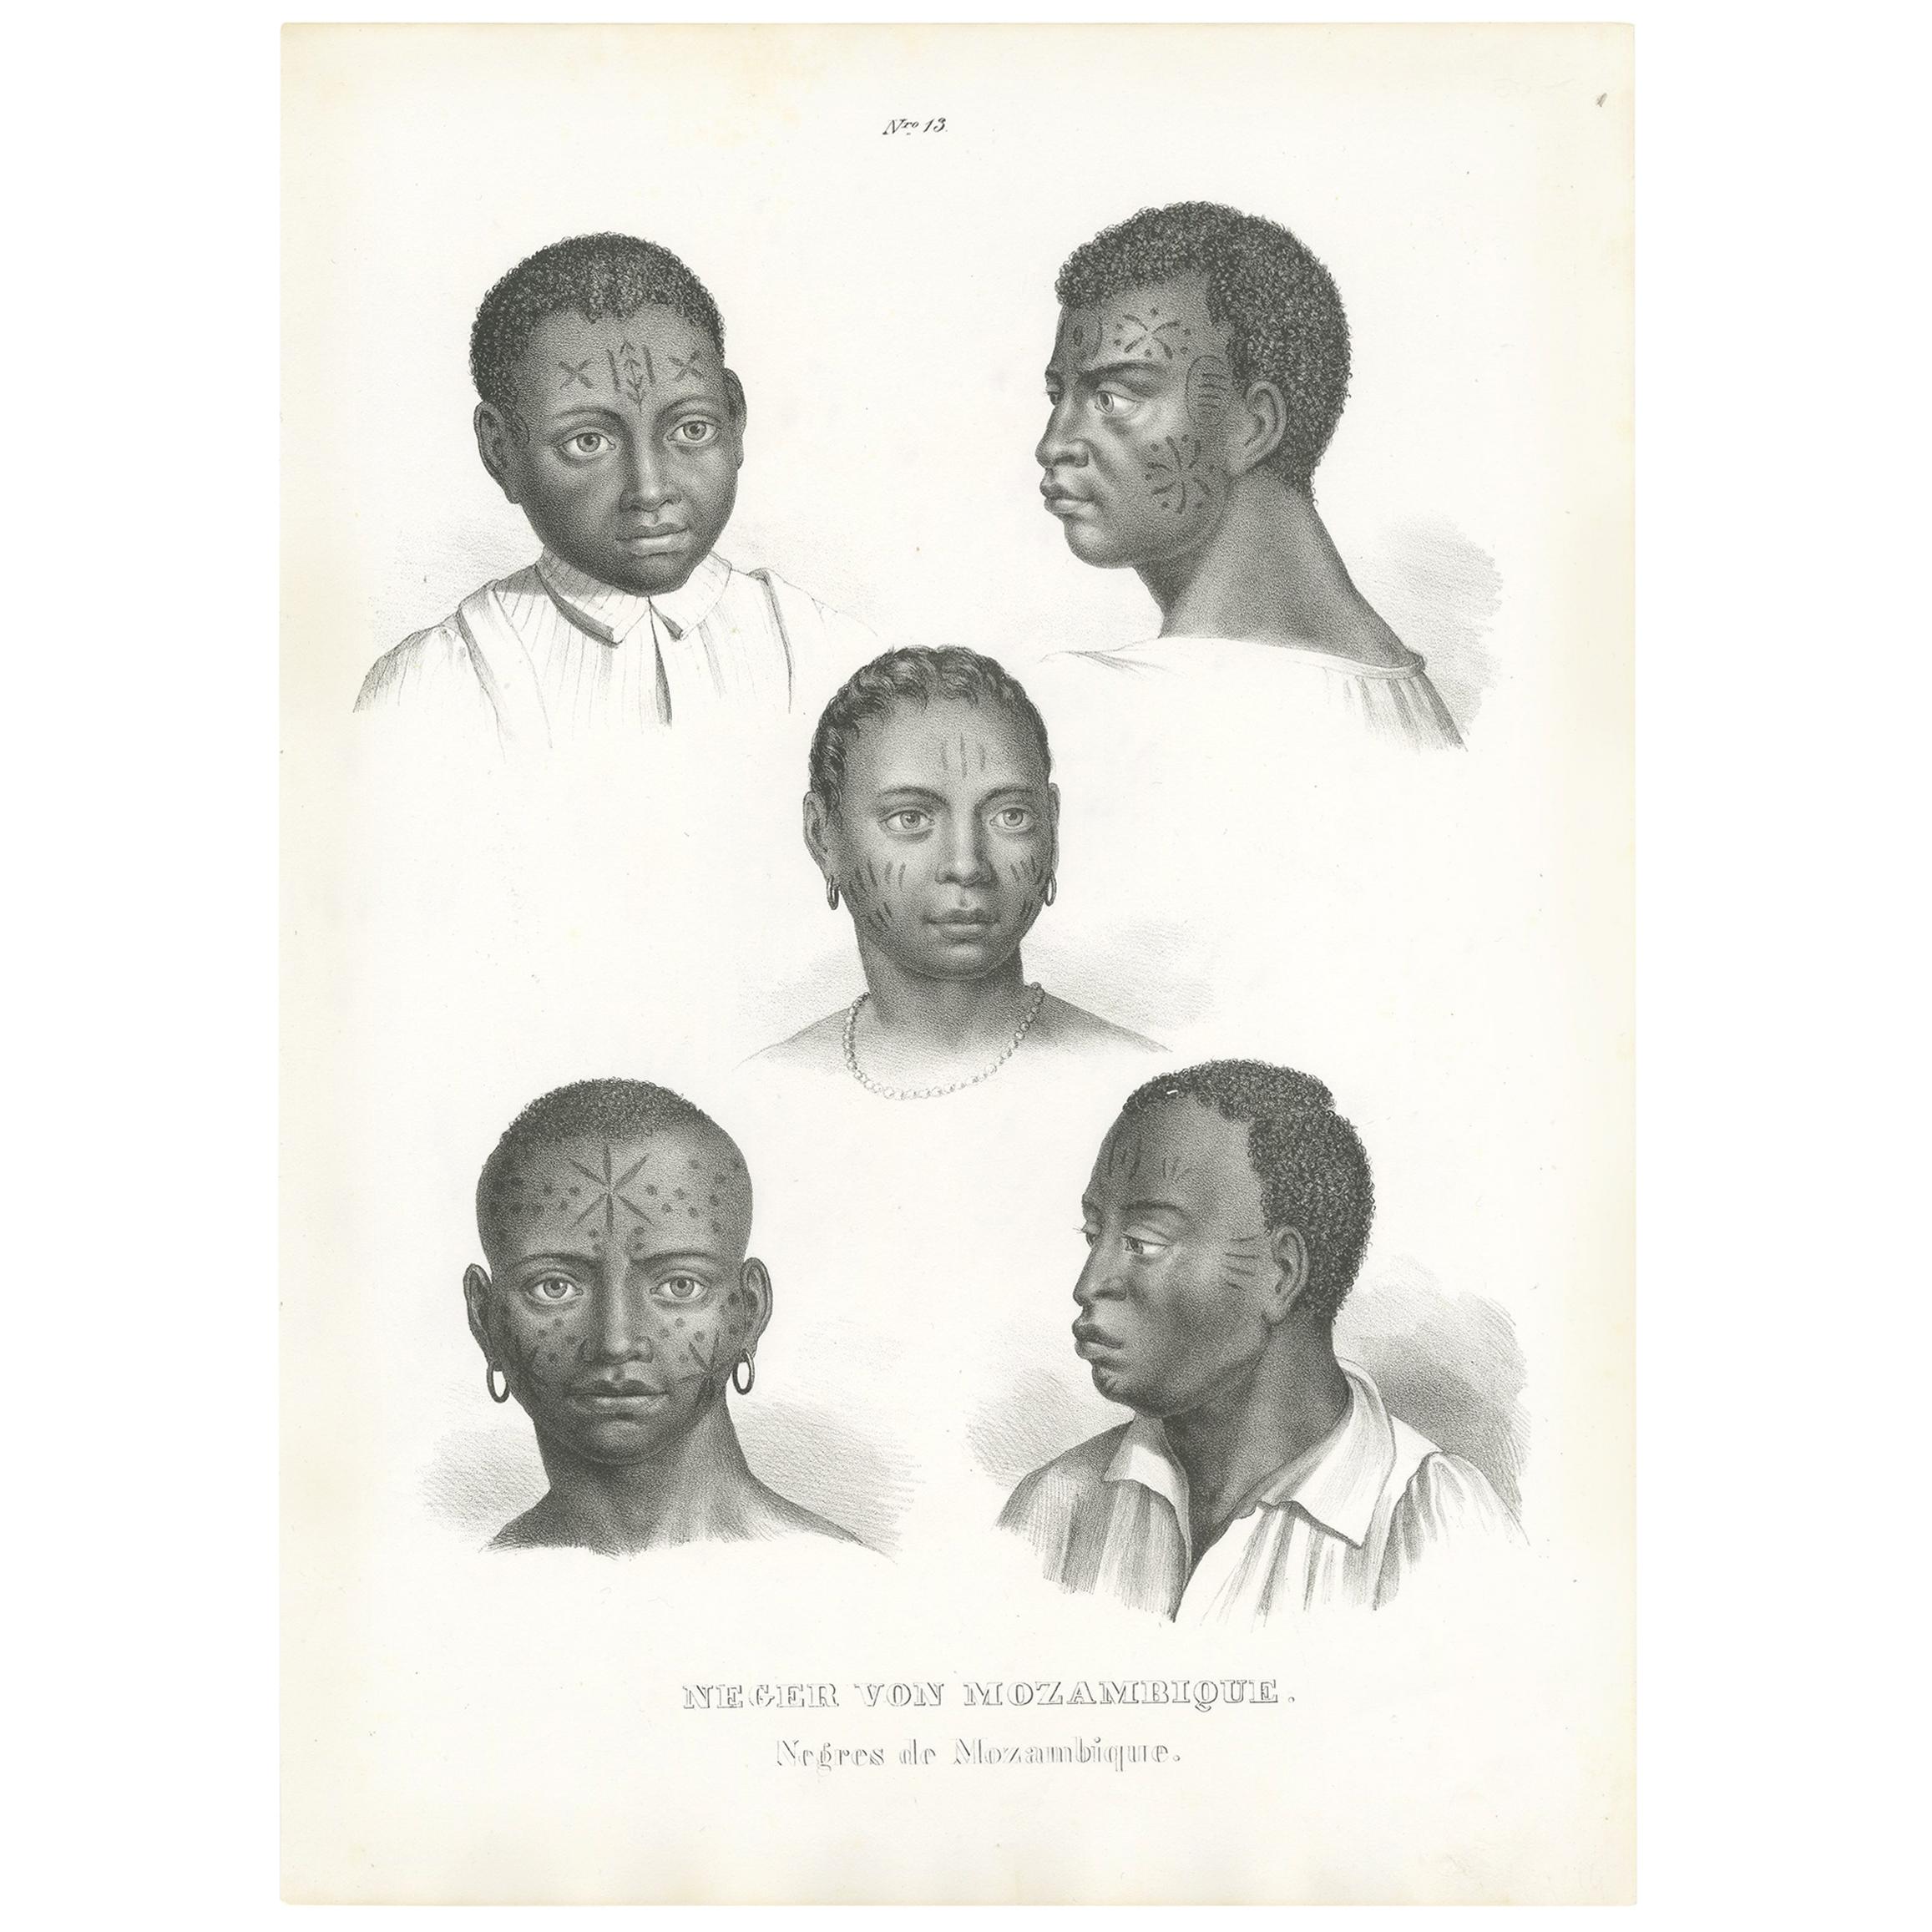 Antique Print of Natives of Mozambique by Honegger '1845'